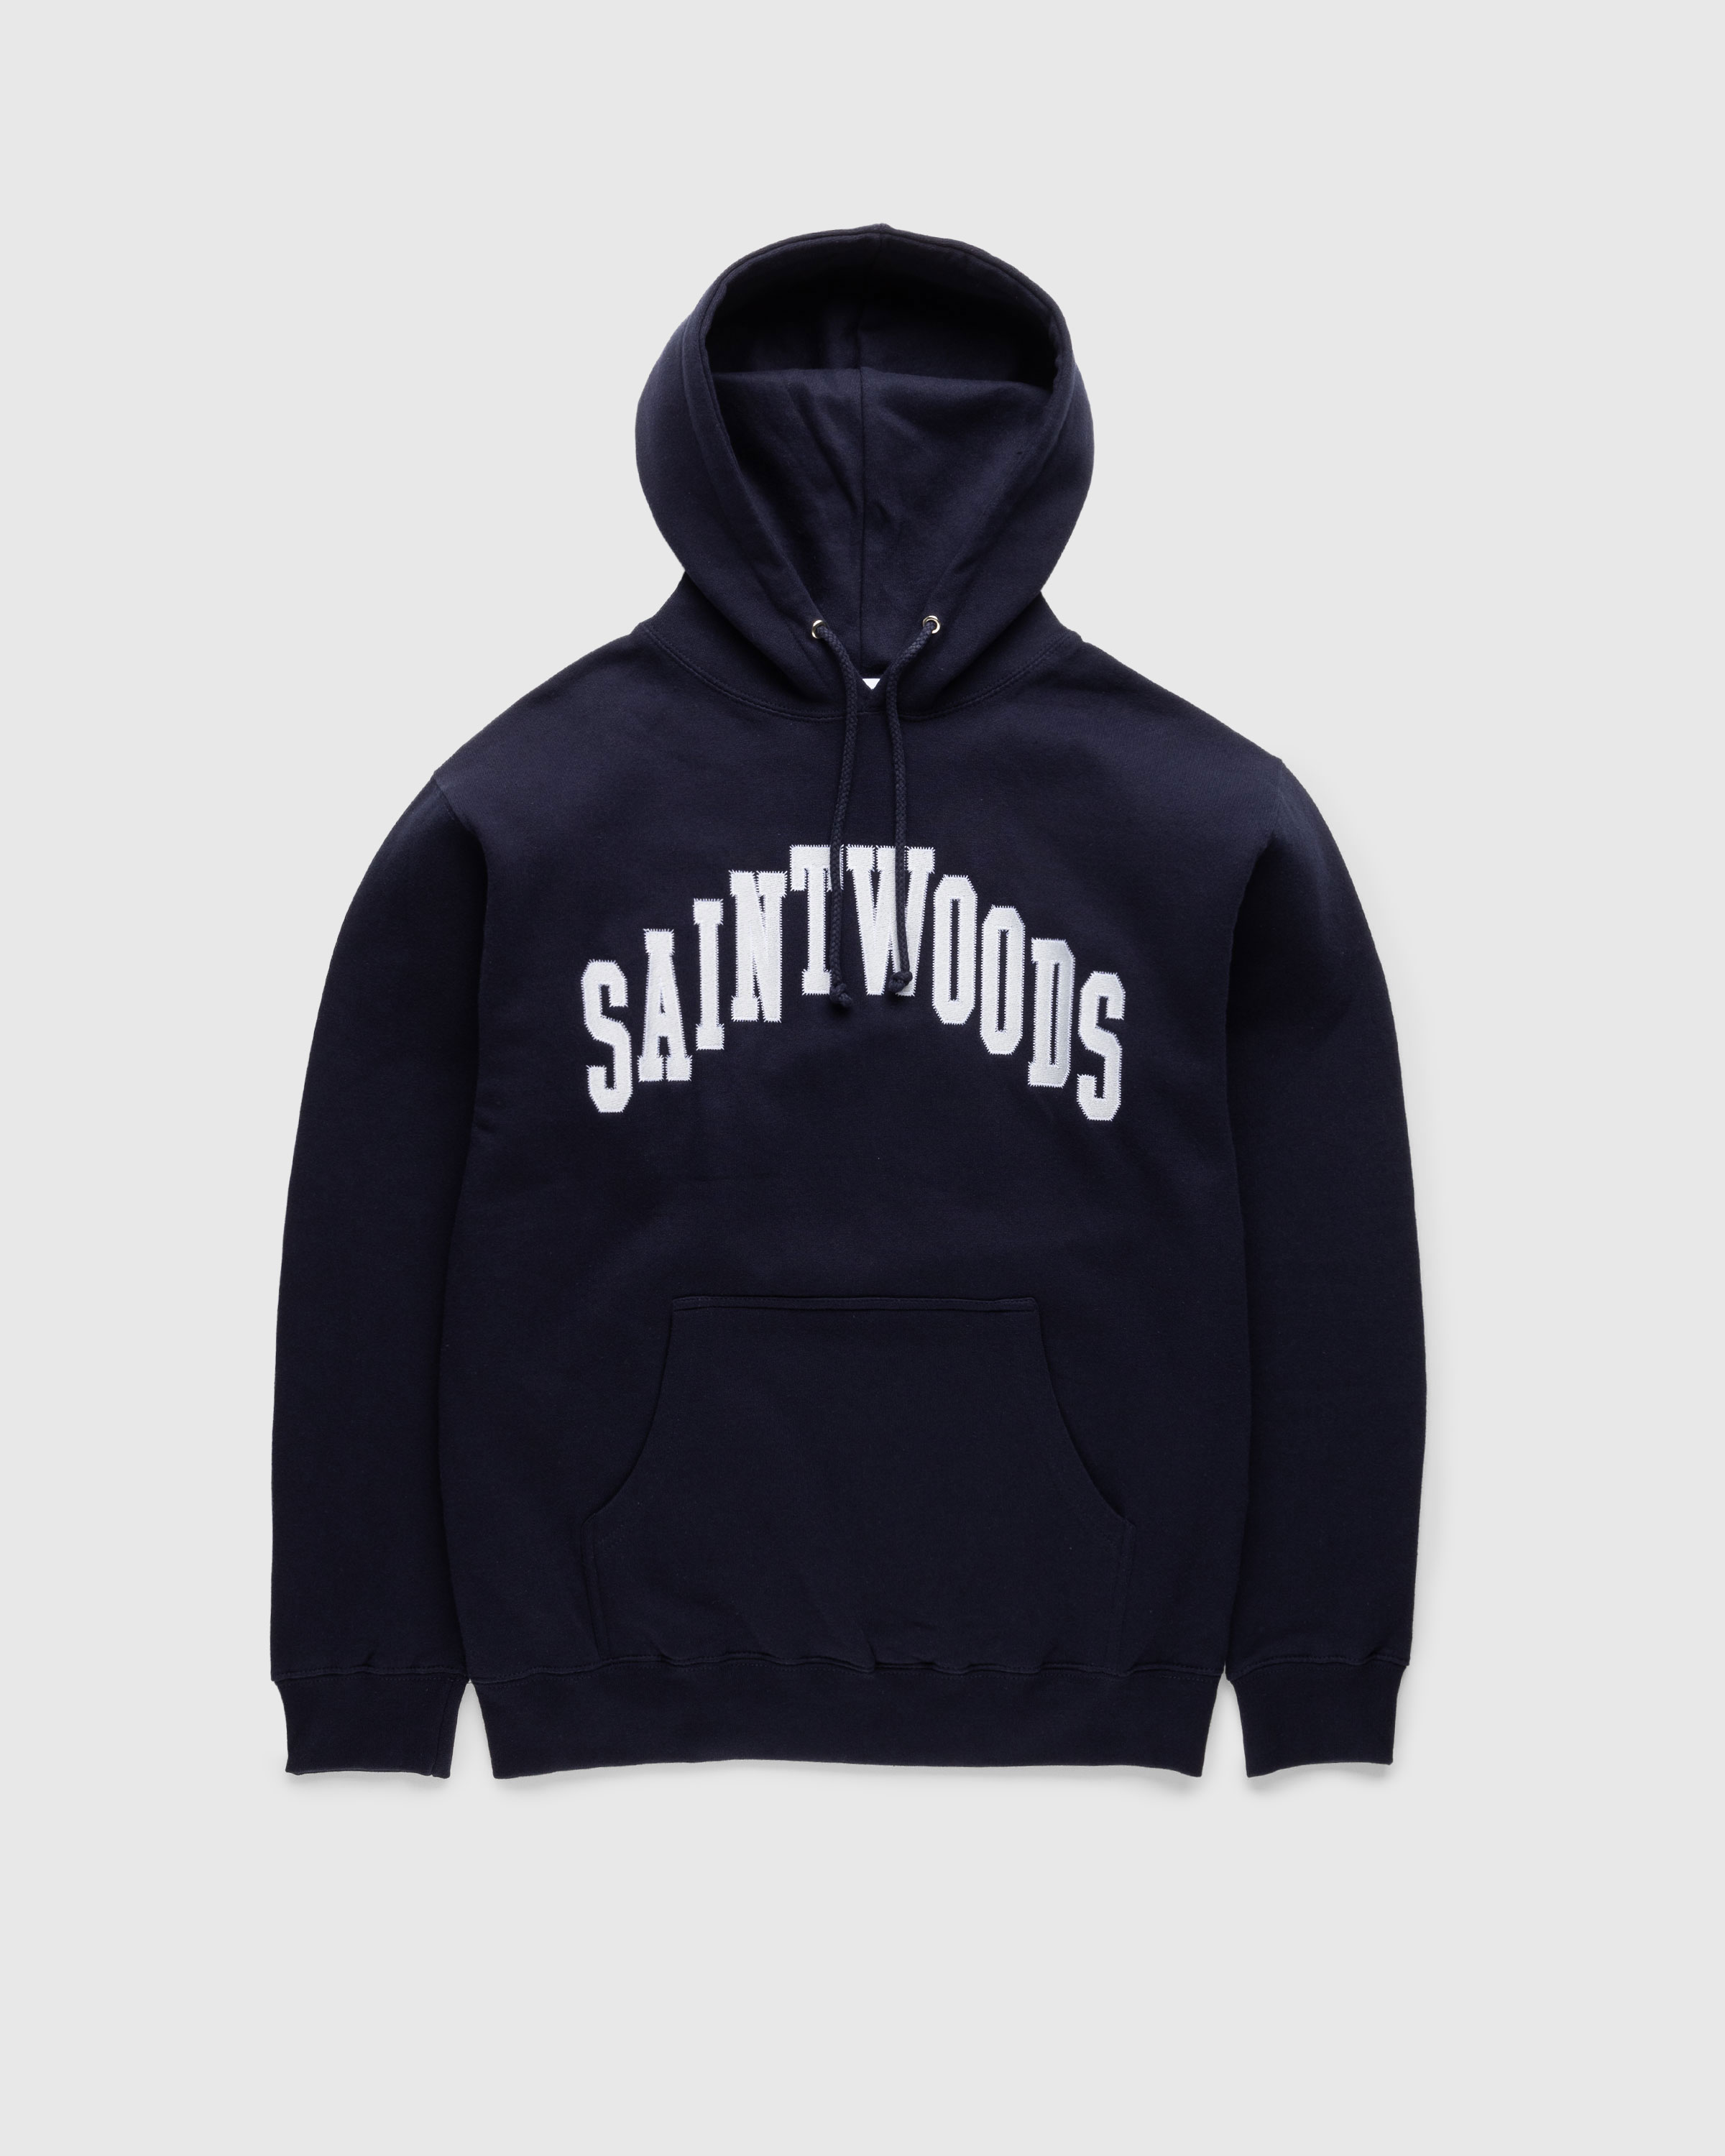 Saintwoods - Arch Hoodie Navy - Clothing - Blue - Image 1